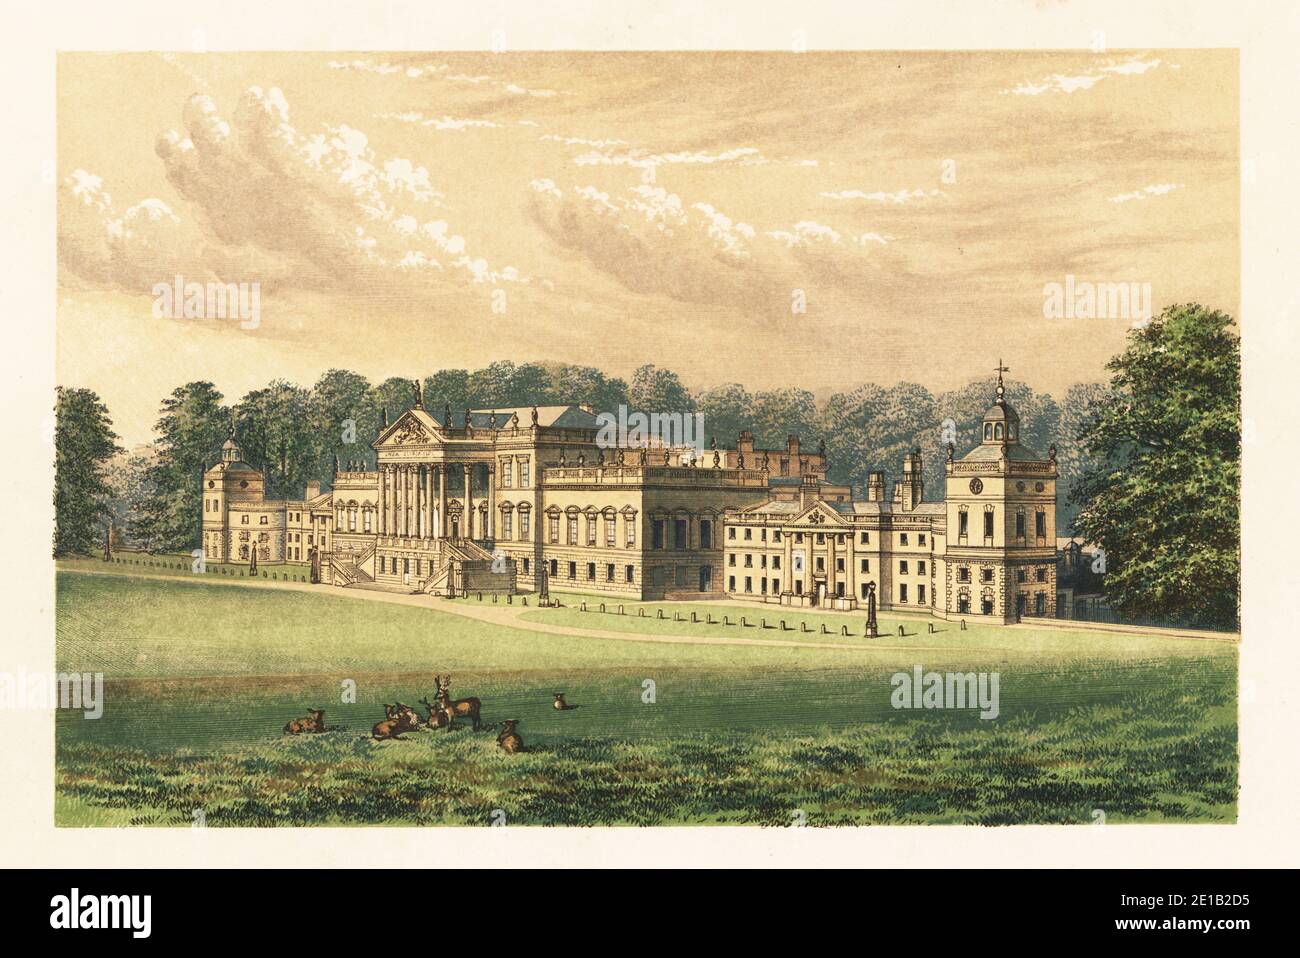 Wentworth Woodhouse, Yorkshire, England. East front of the Jacobean house rebuilt by Henry Flitcroft for Thomas Watson-Wentworth, Lord Malton, in the 18th century. The west front was rebuilt in English Baroque style by Ralph Tunnicliffe. The gardens were landscaped by Humphry Repton in 1790. Colour woodblock by Benjamin Fawcett in the Baxter process of an illustration by Alexander Francis Lydon from Reverend Francis Orpen Morris’s Picturesque Views of the Seats of Noblemen and Gentlemen of Great Britain and Ireland, William Mackenzie, London, 1880. Stock Photo